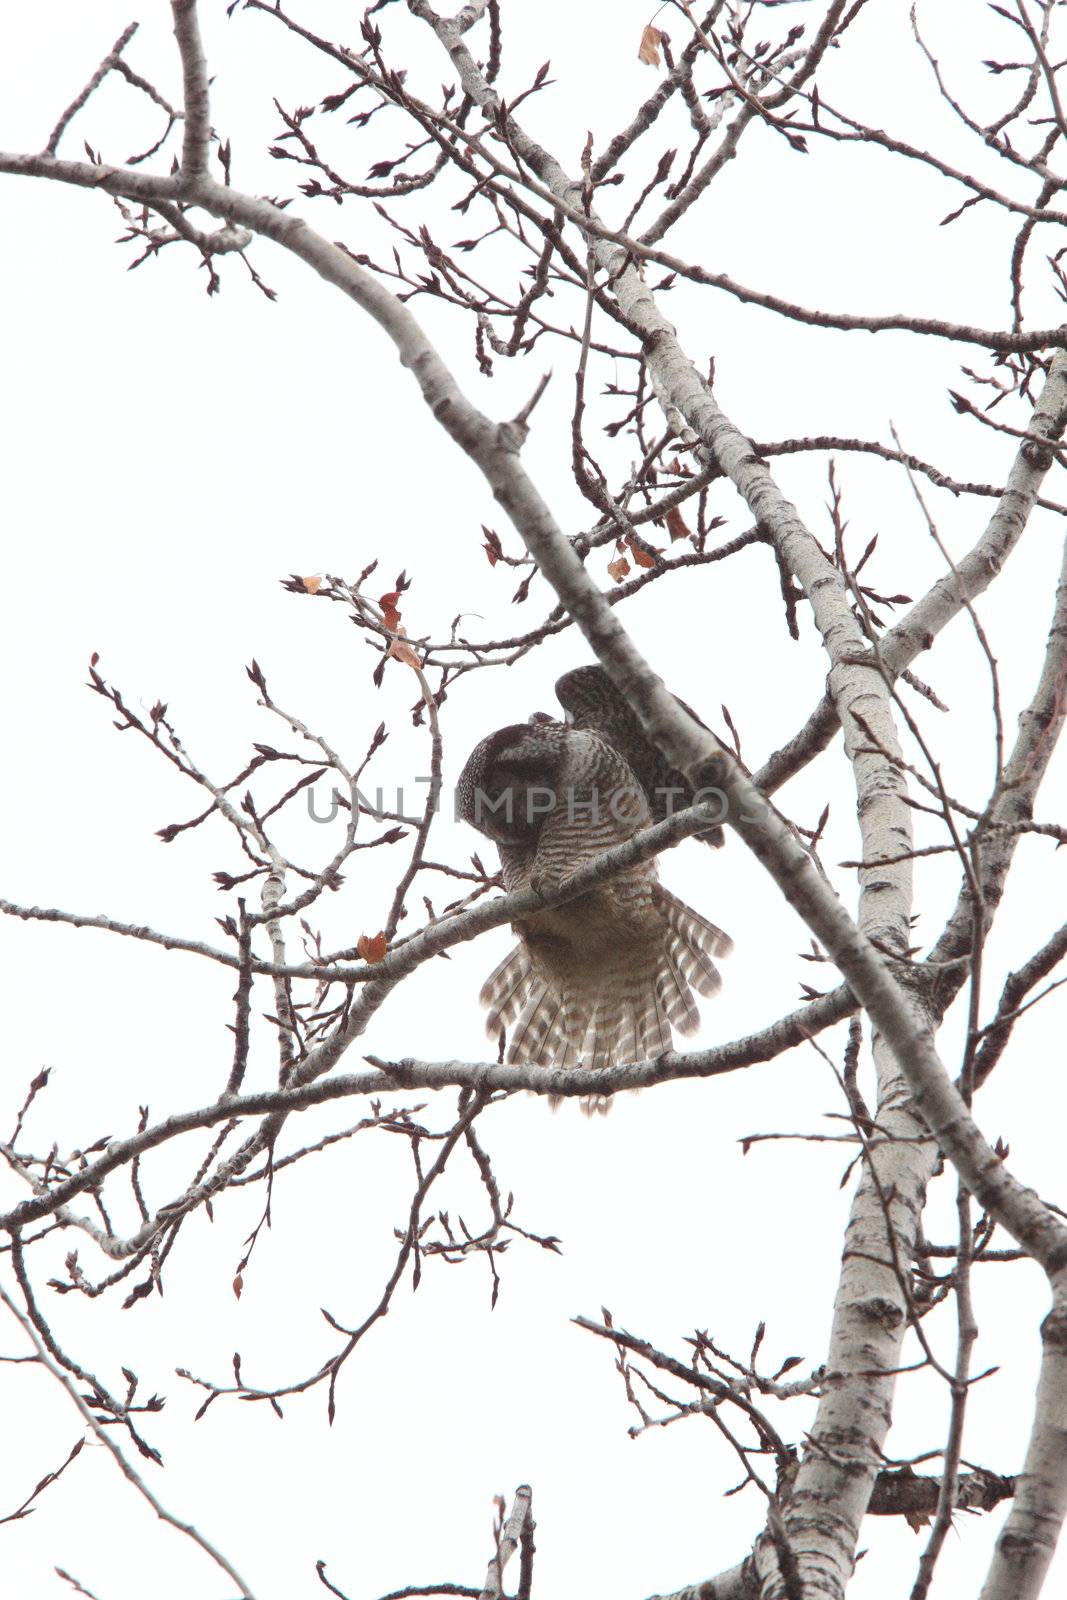 Northern Hawk Owl by pictureguy